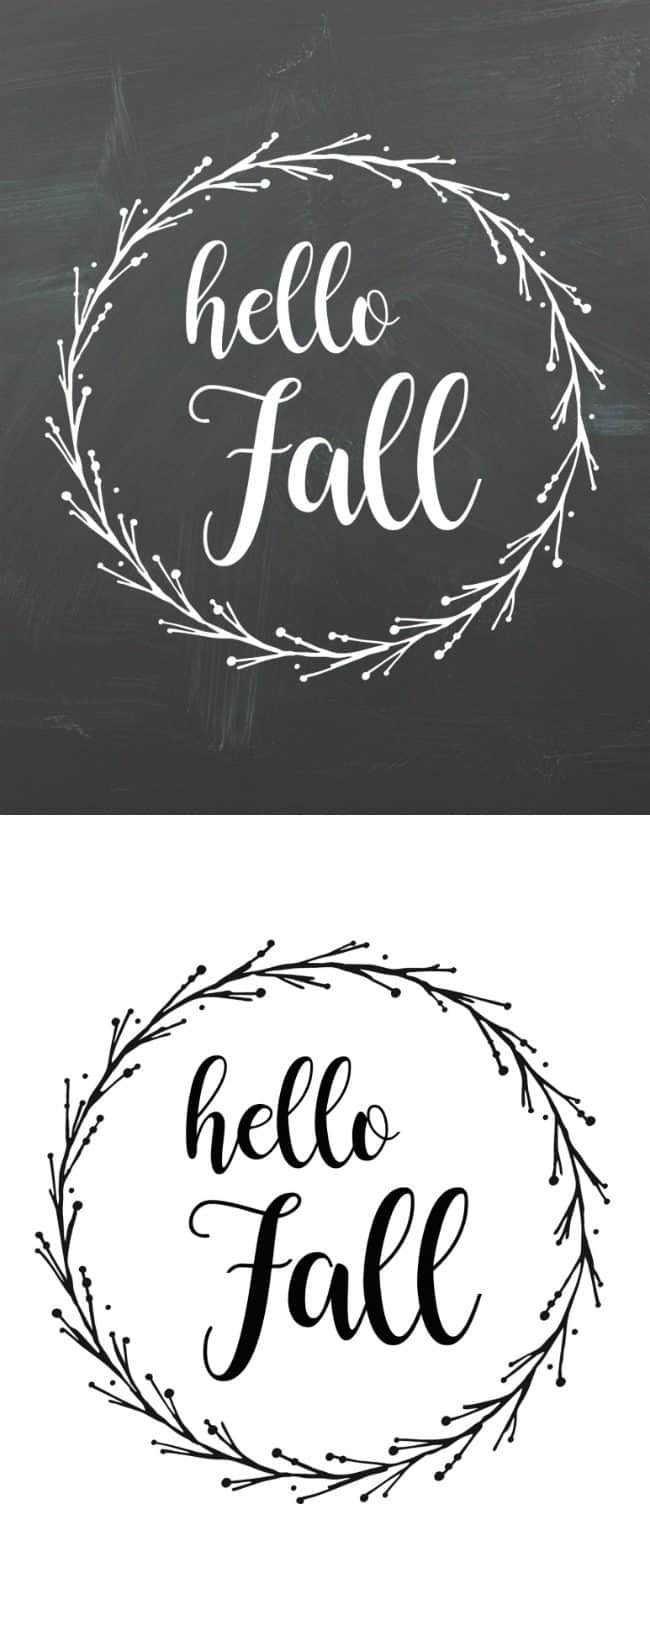 Hello Farmhouse Sign in Black and White Wreath Obsessed